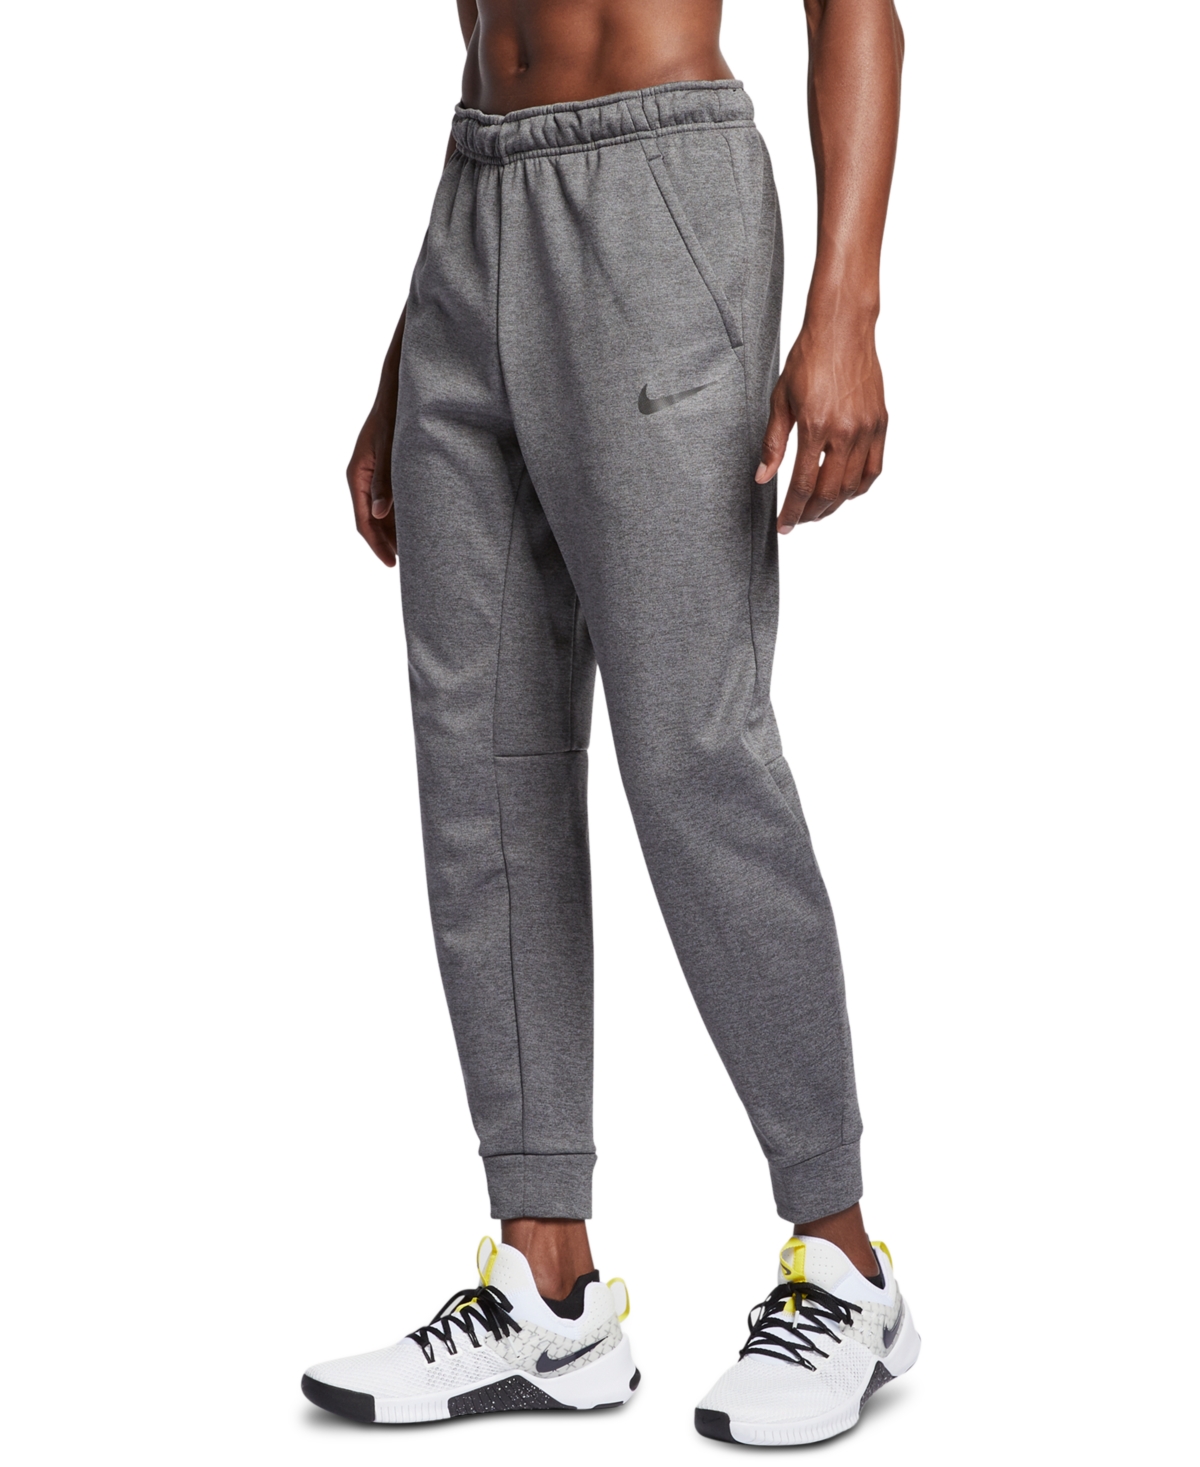 UPC 886668341309 product image for Nike Men's Therma Tapered Training Pants | upcitemdb.com